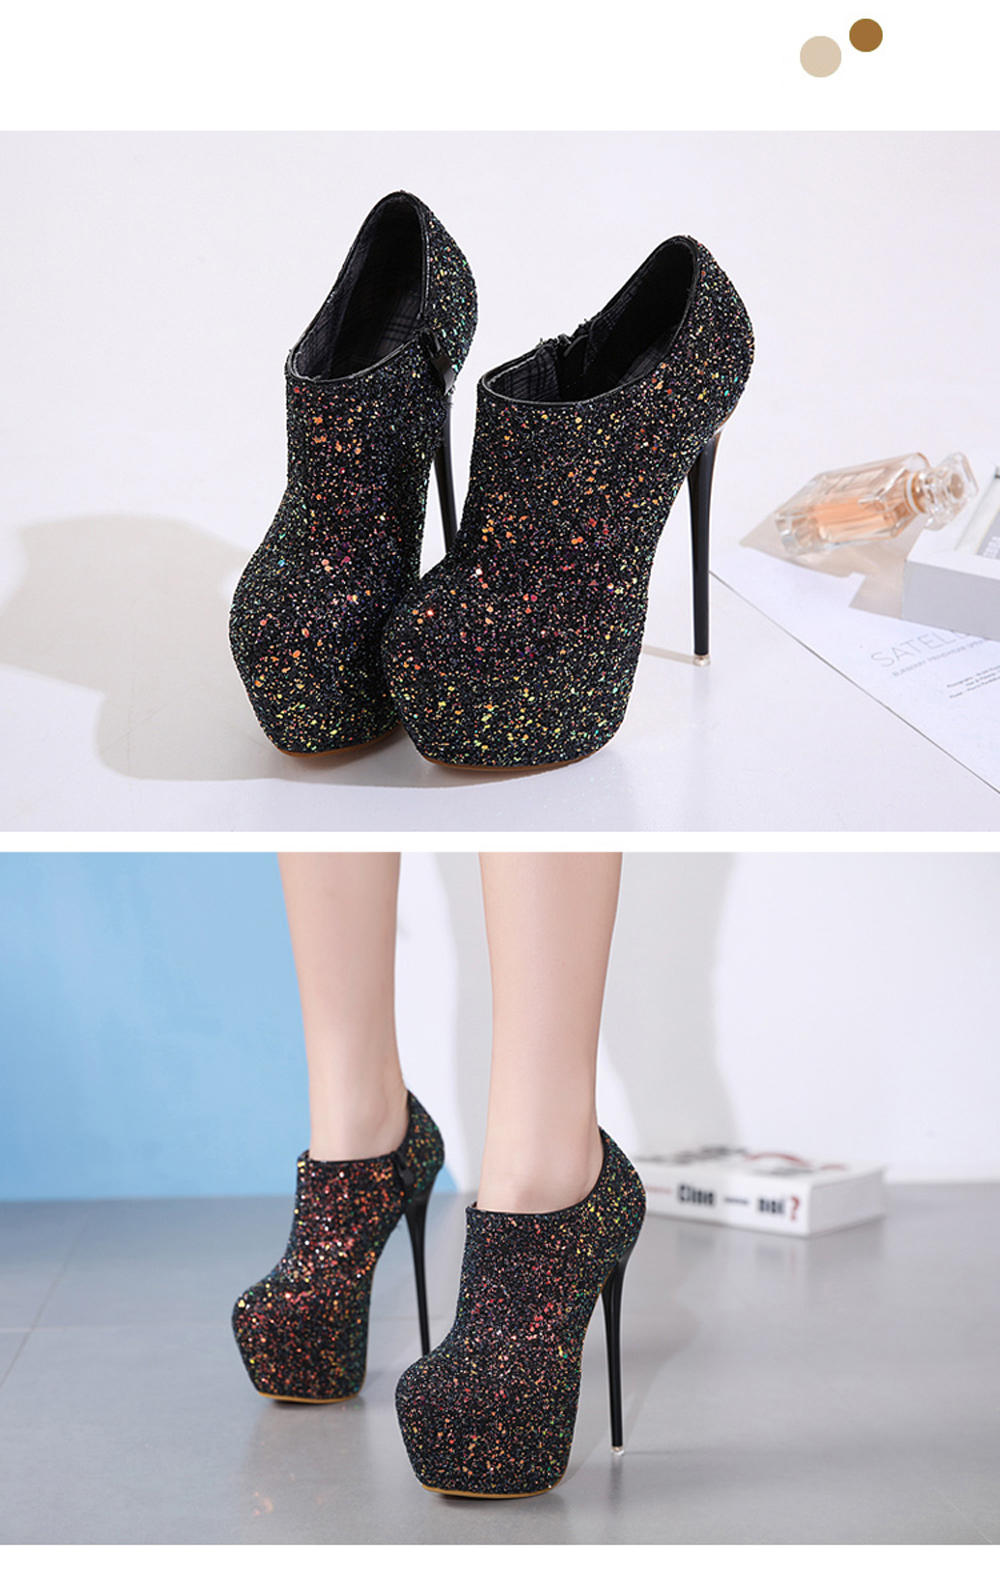 Women's Round Toe Platform Shoes Club Party High Heels with Sequined